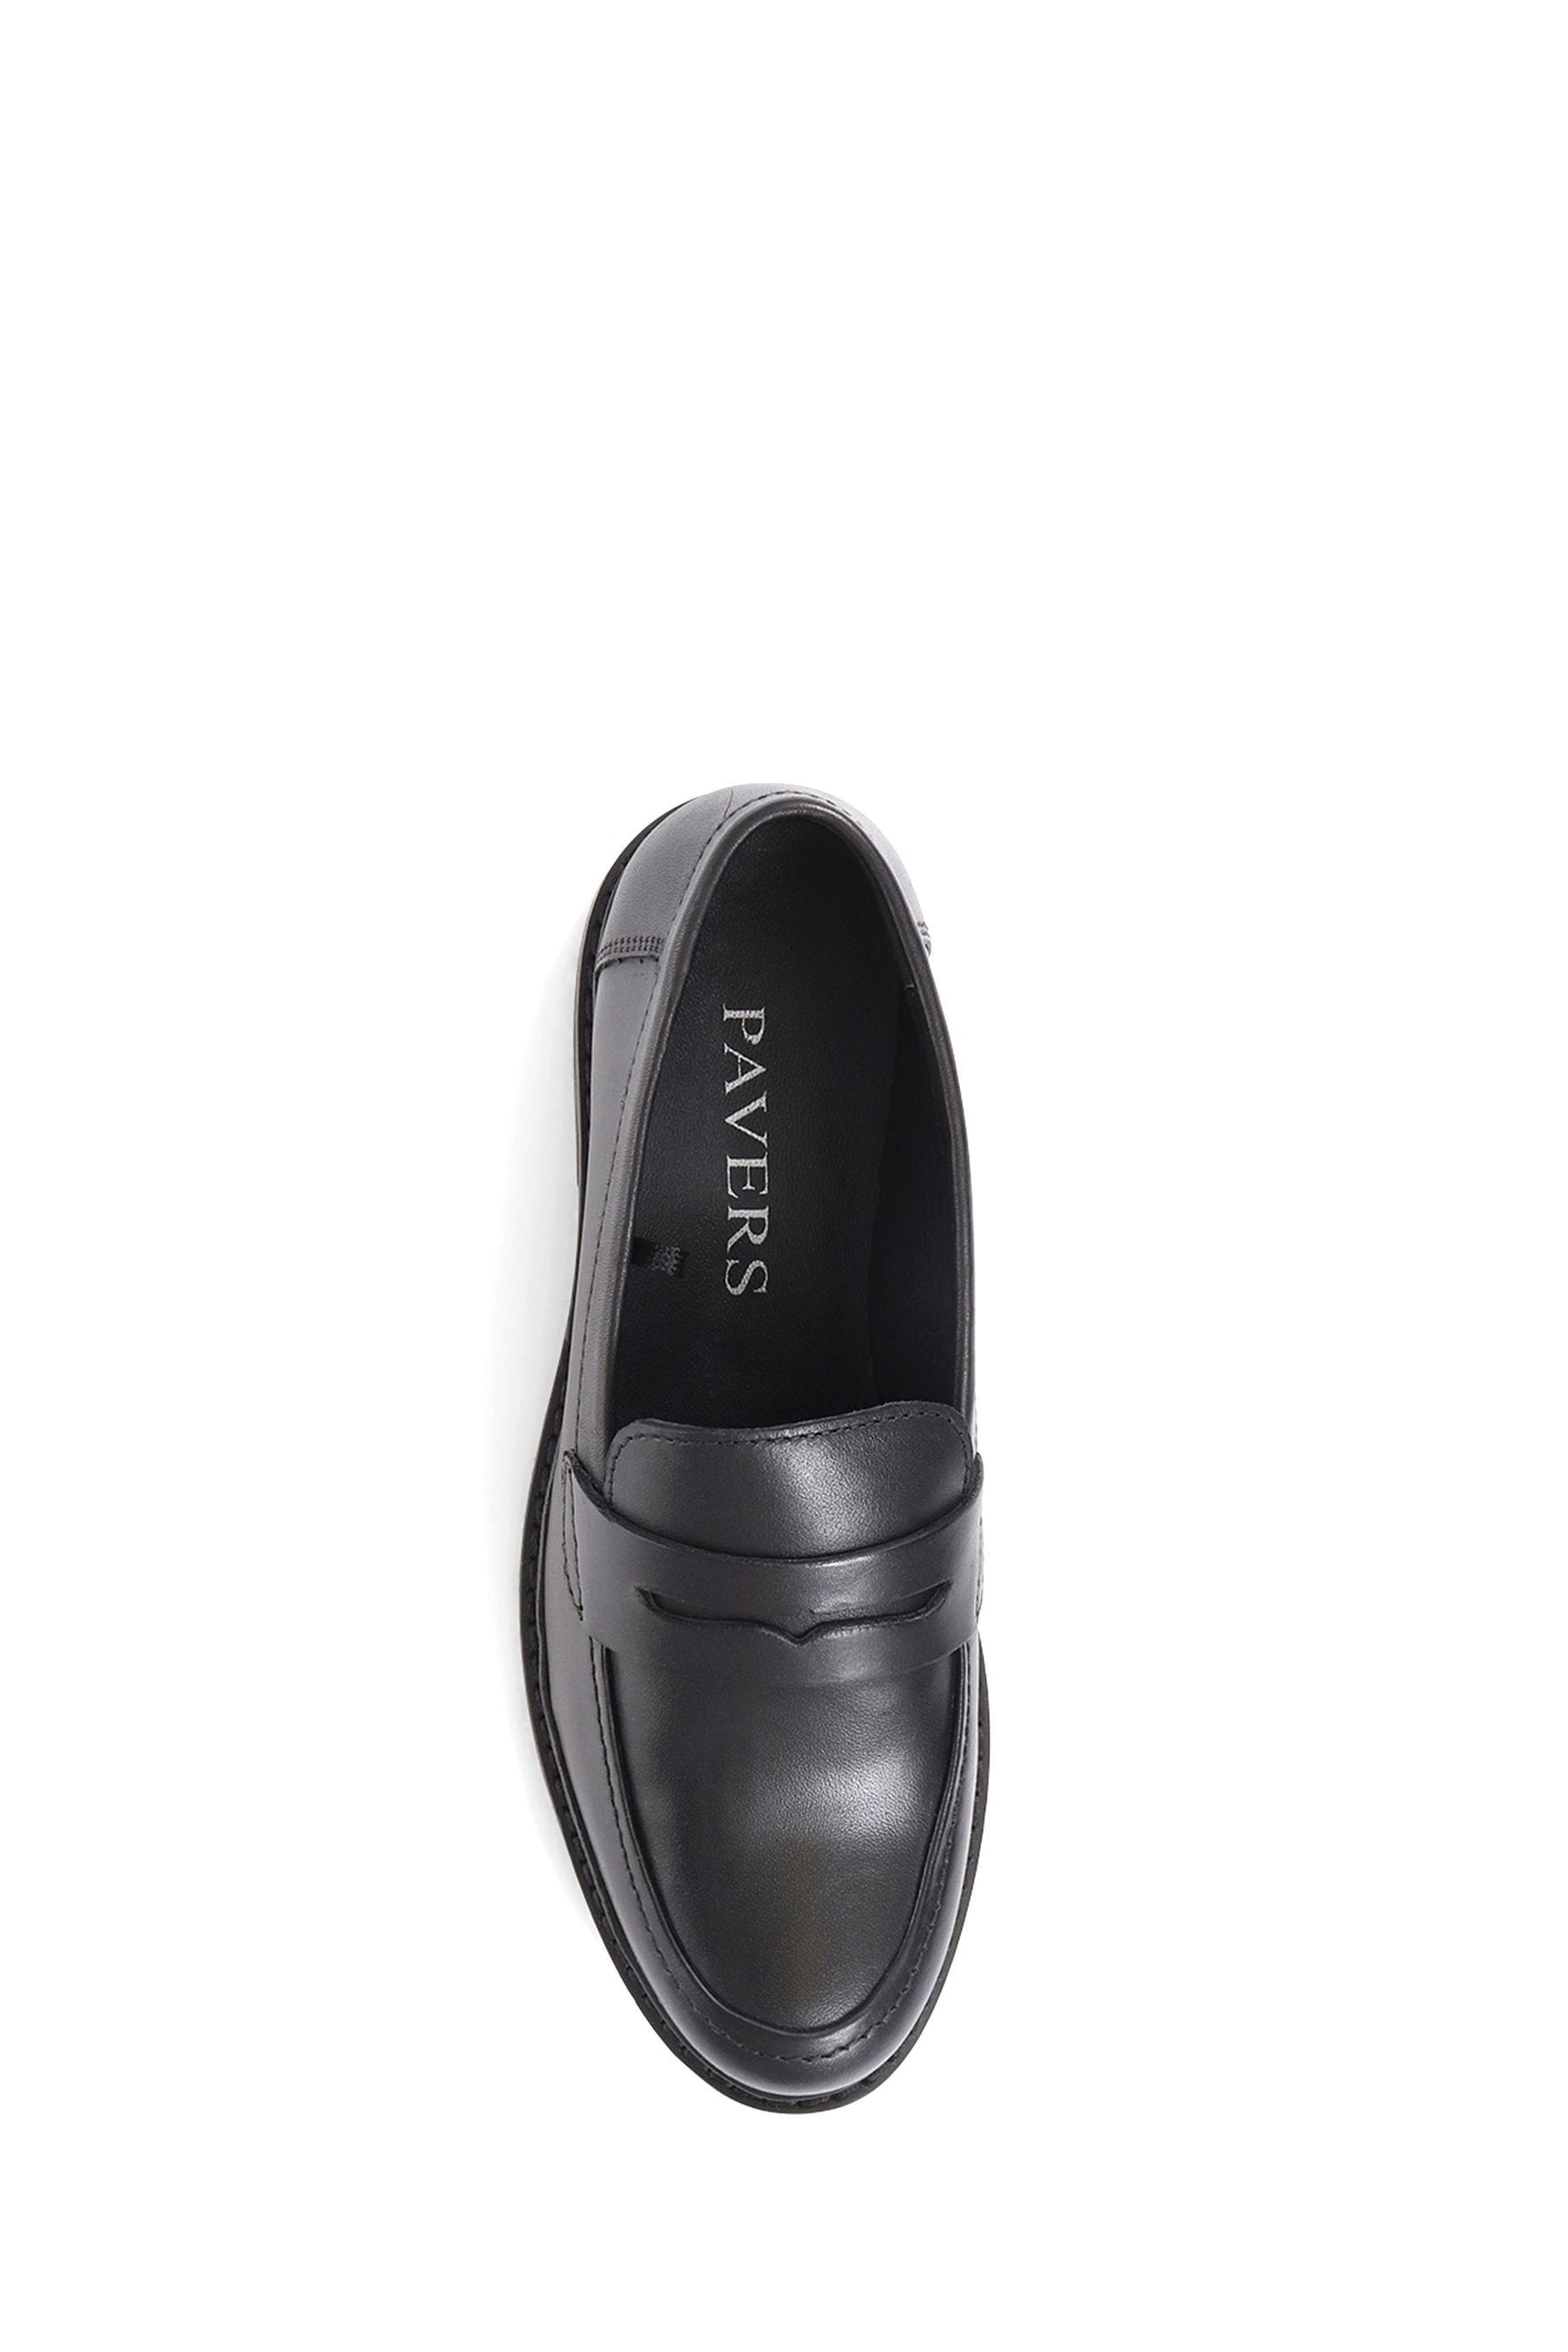 Buy Pavers Smart Leather Black Penny Loafers from the Next UK online shop